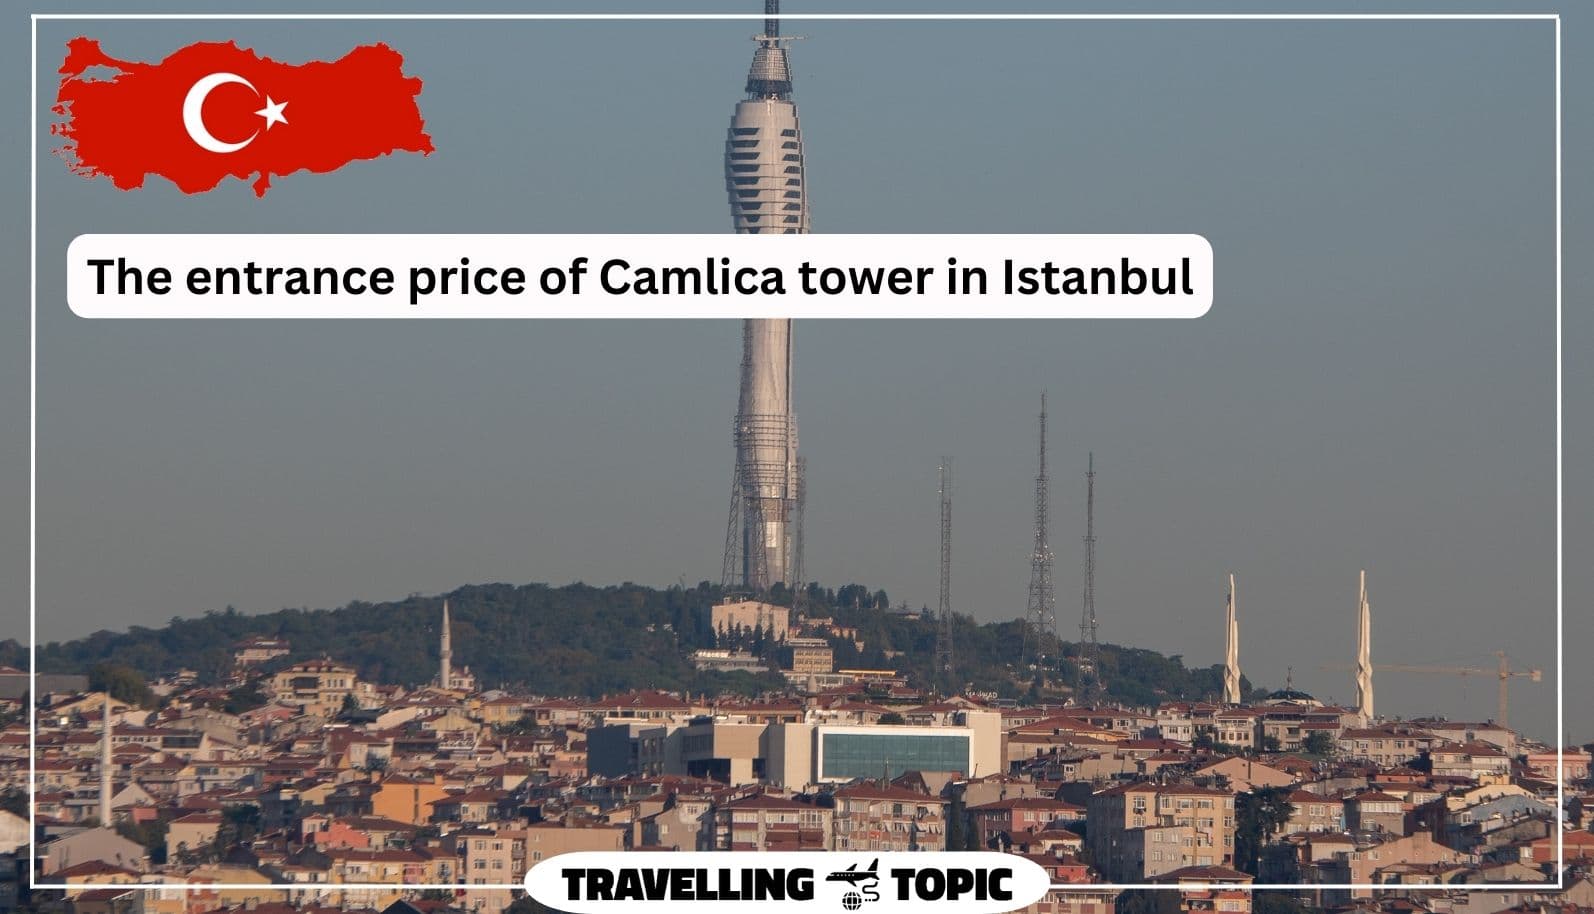 The entrance price of Camlica tower in Istanbul